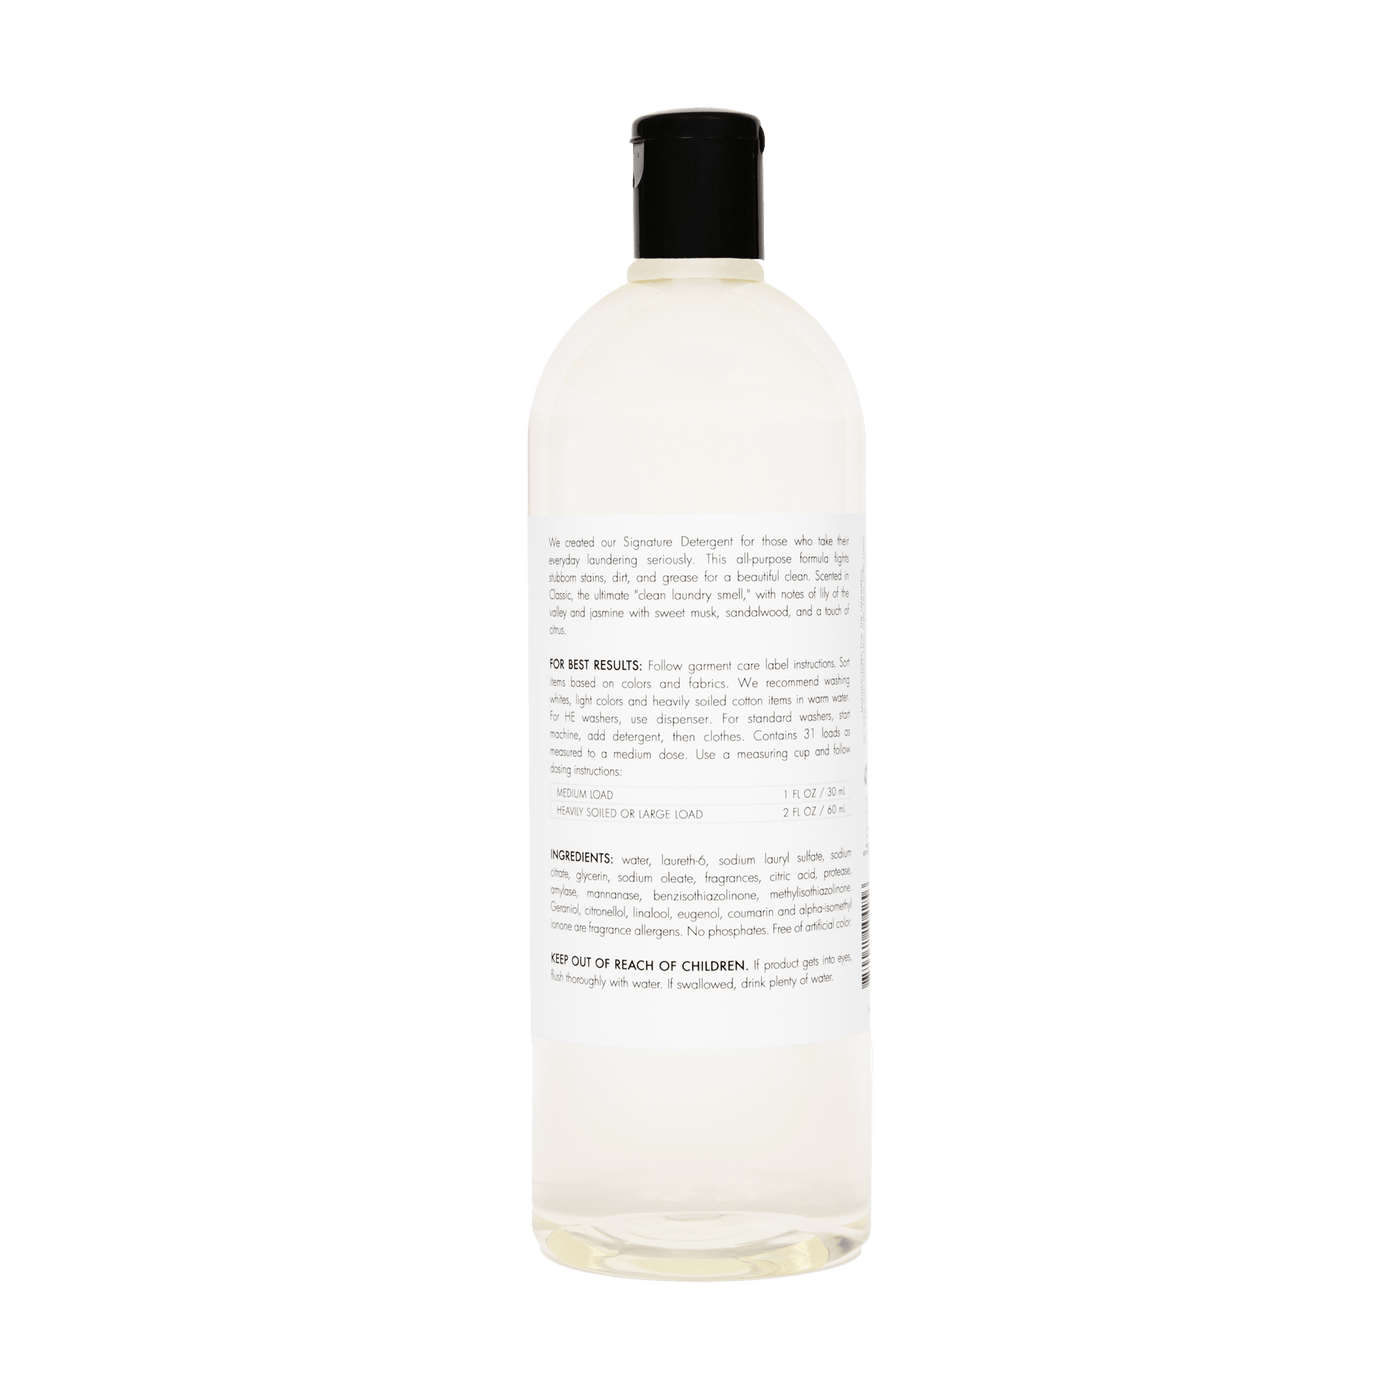 Signature Detergent Classic Household Supplies The Laundress